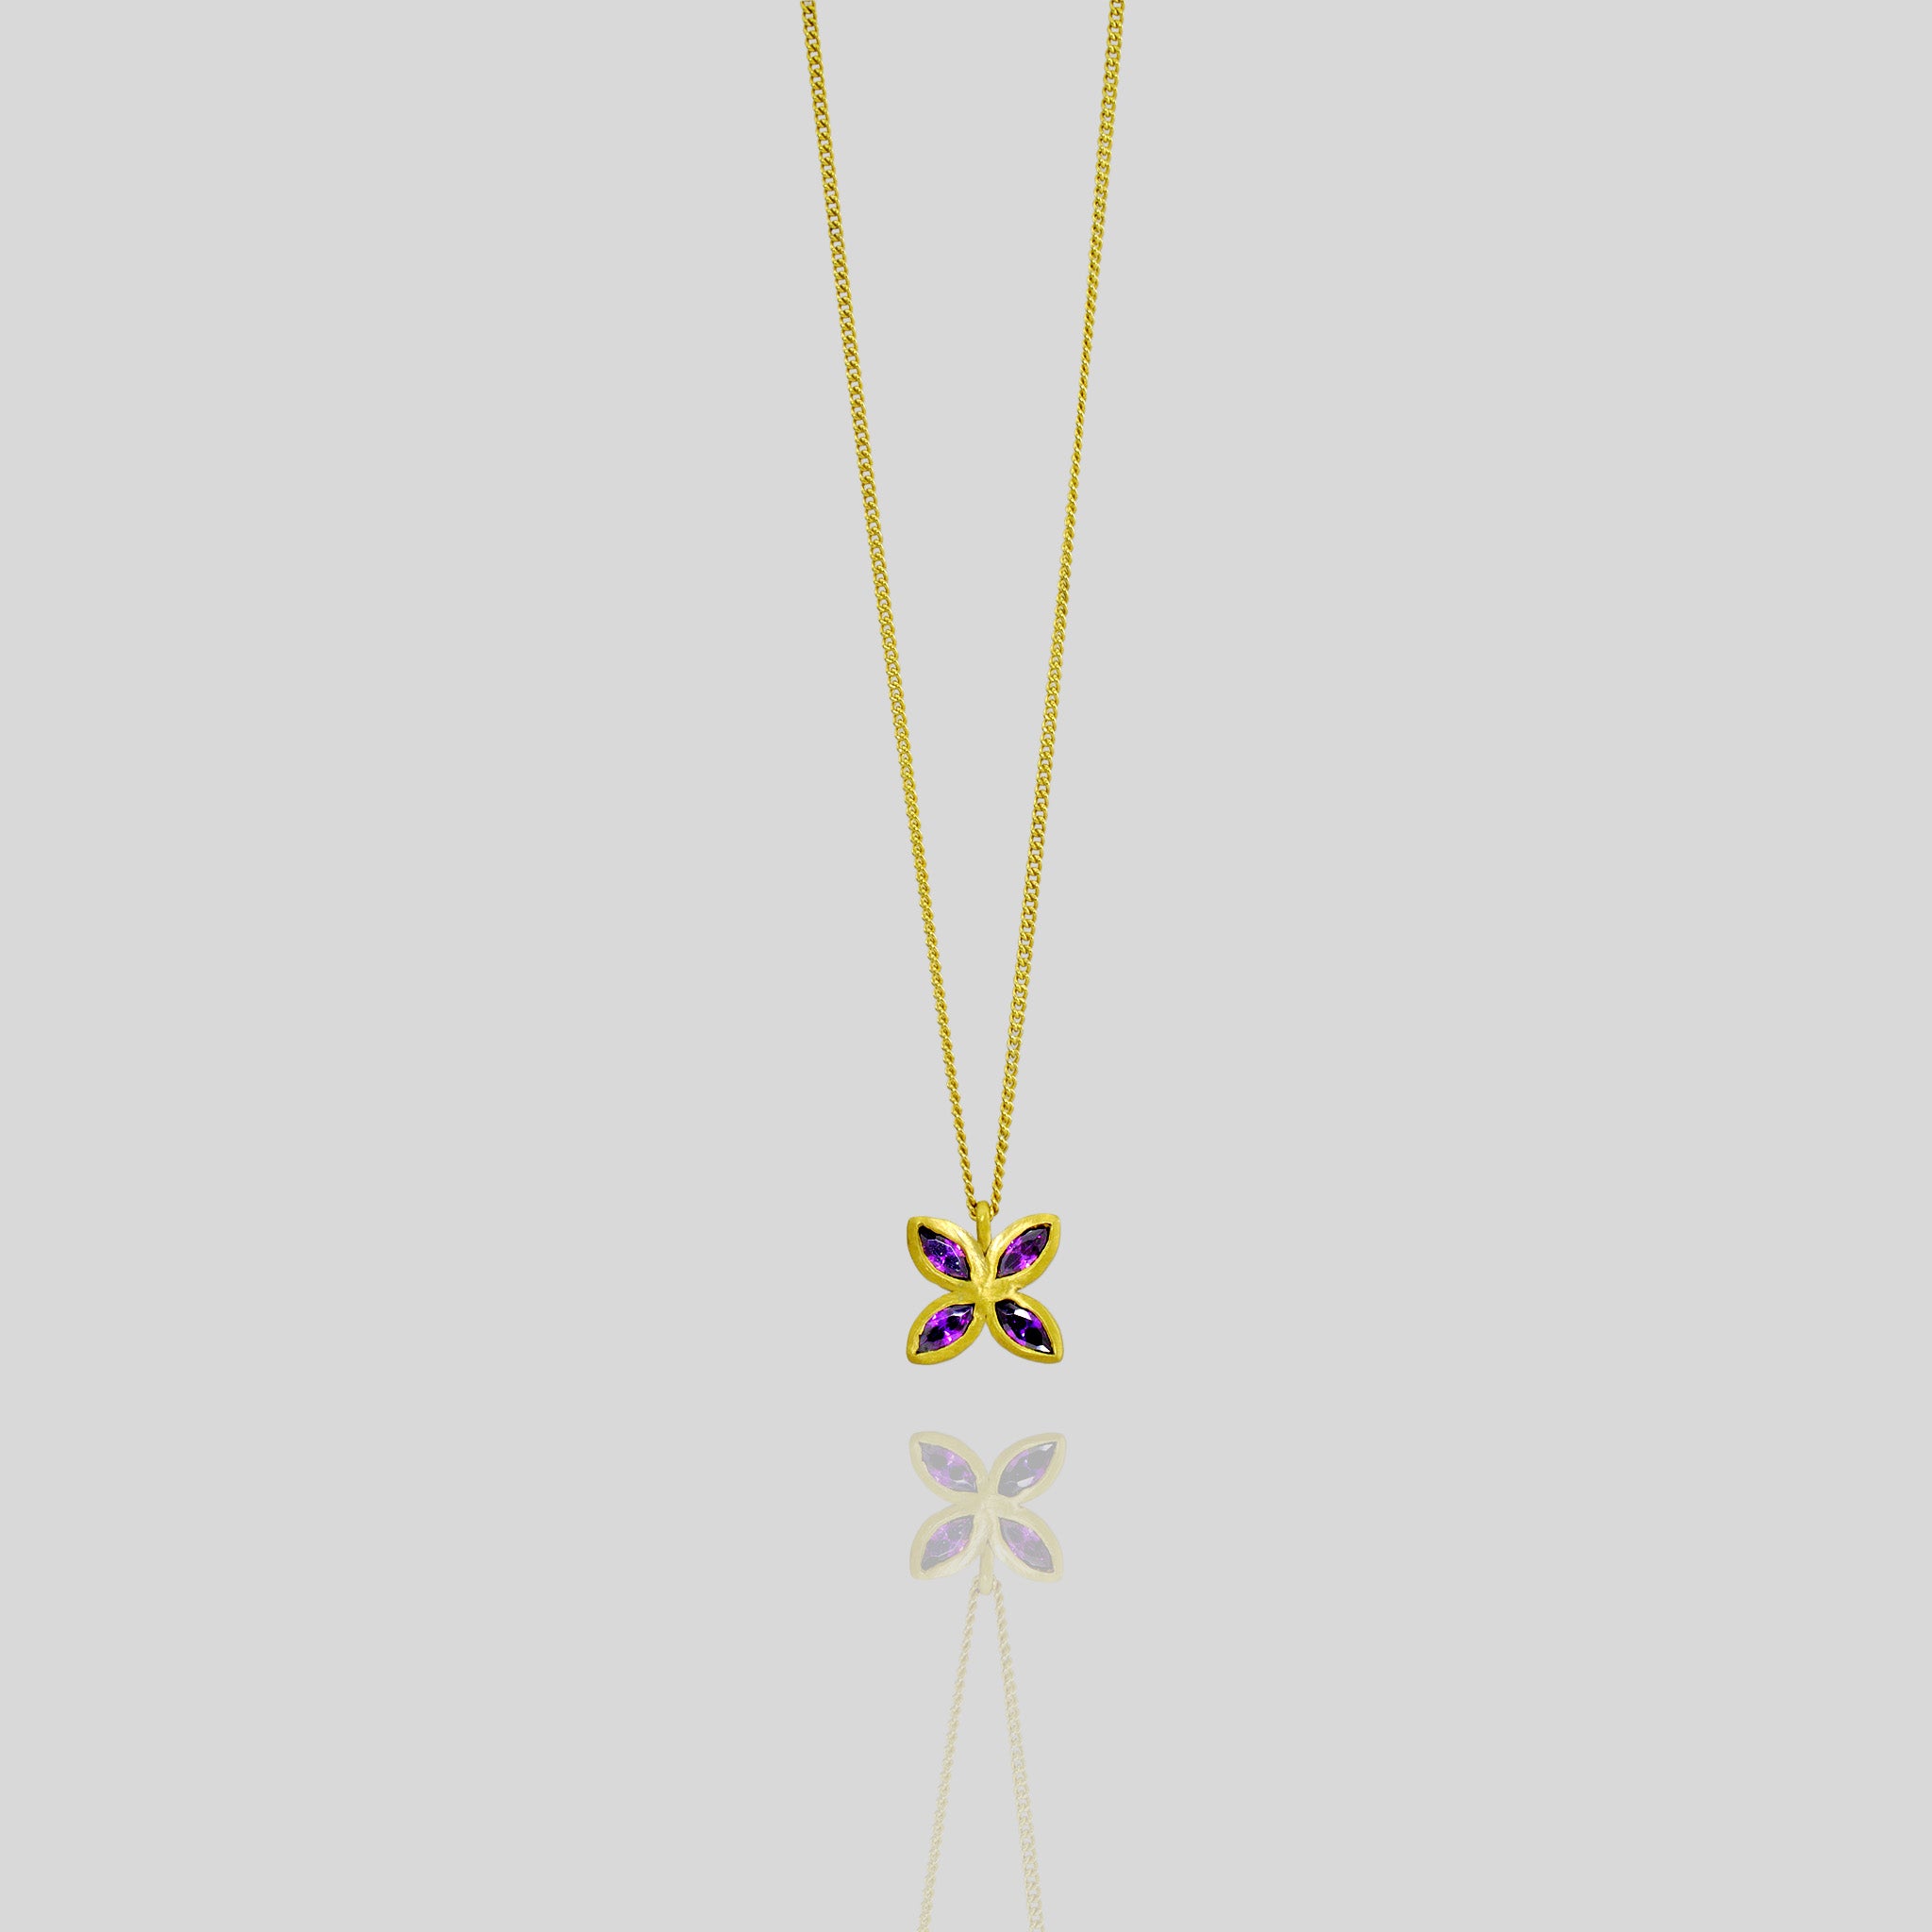 Elegant gold pendant with four marquise-cut amethysts arranged into a delicate flower design, offering luxury and beauty suitable for any gift occasion.